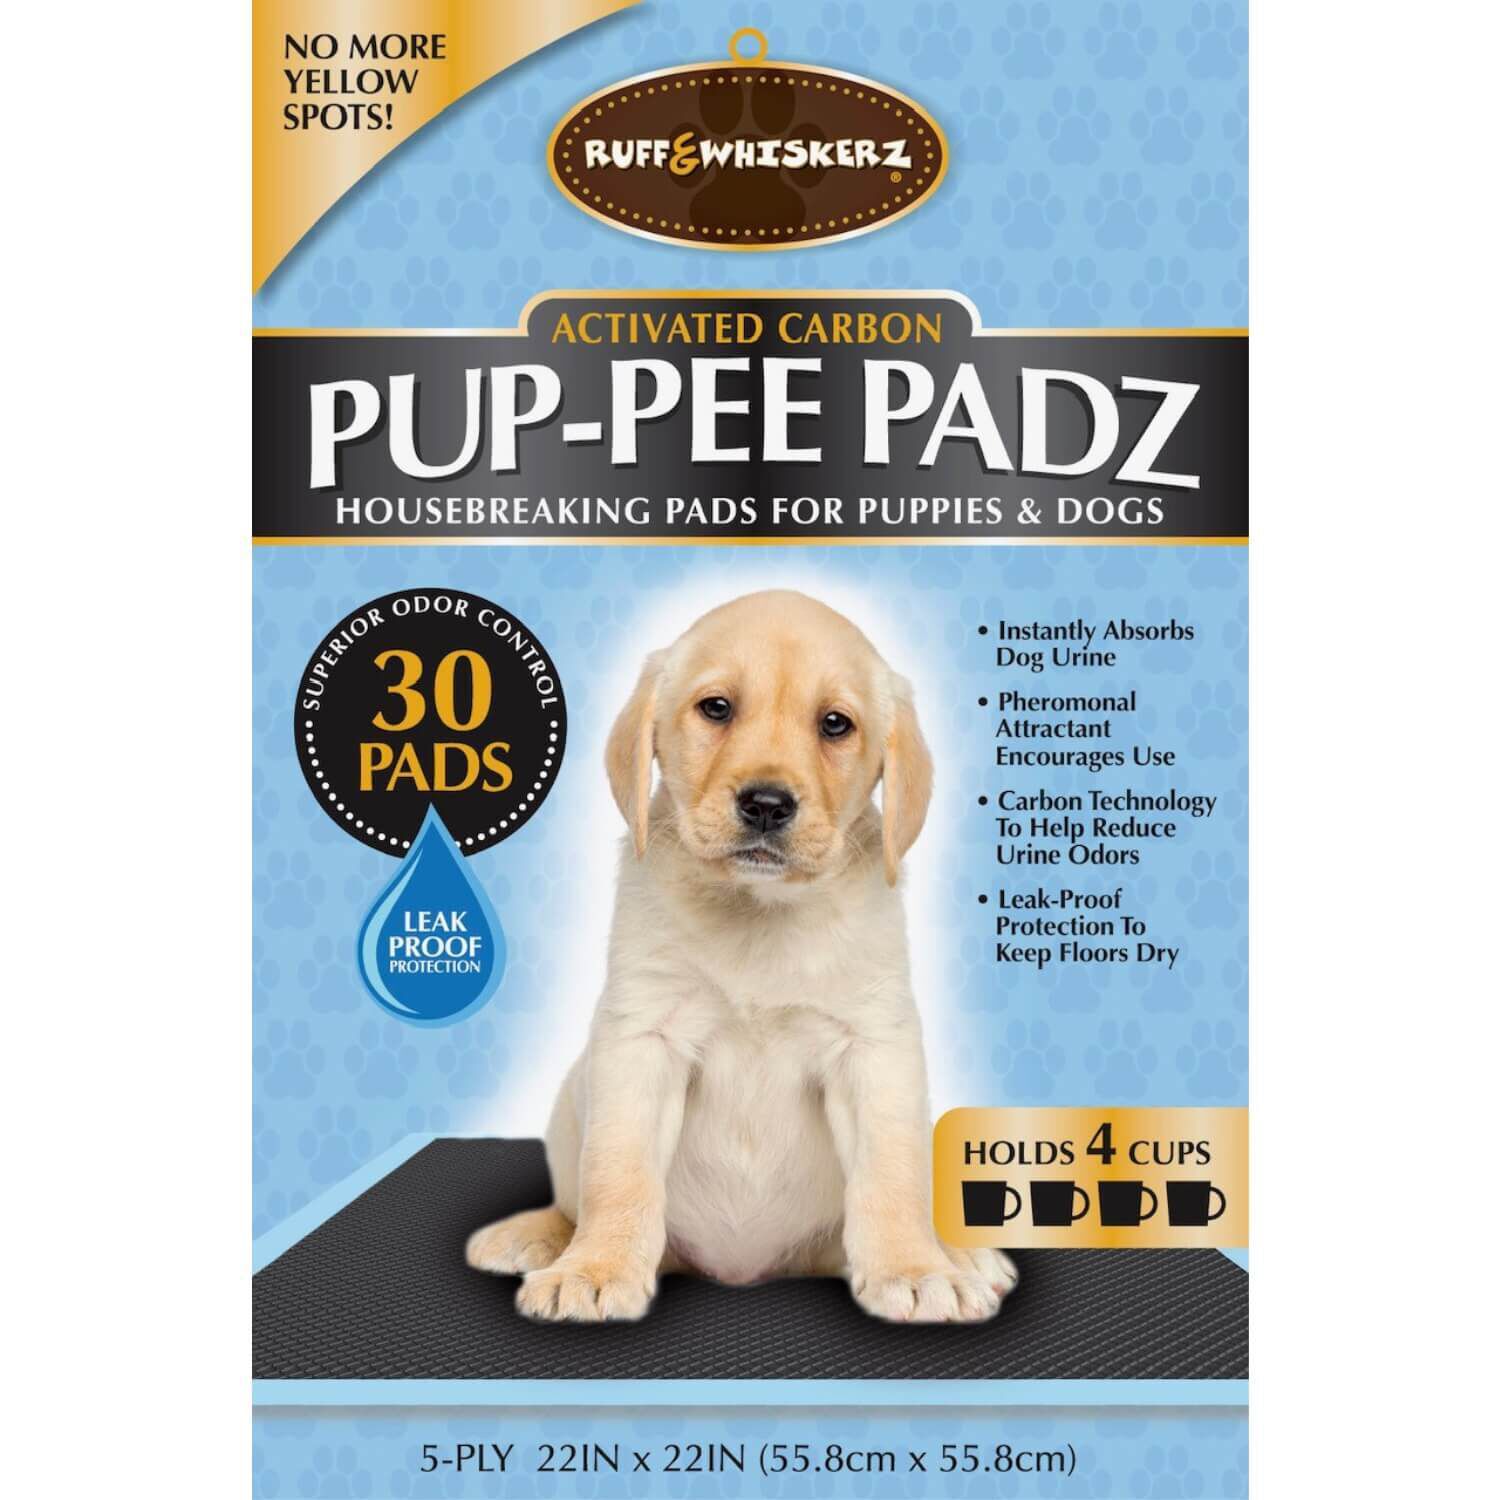 NEW! $2 Off Ruff & Whiskerz Activated Carbon Pup-Pee Padz 30 ct.